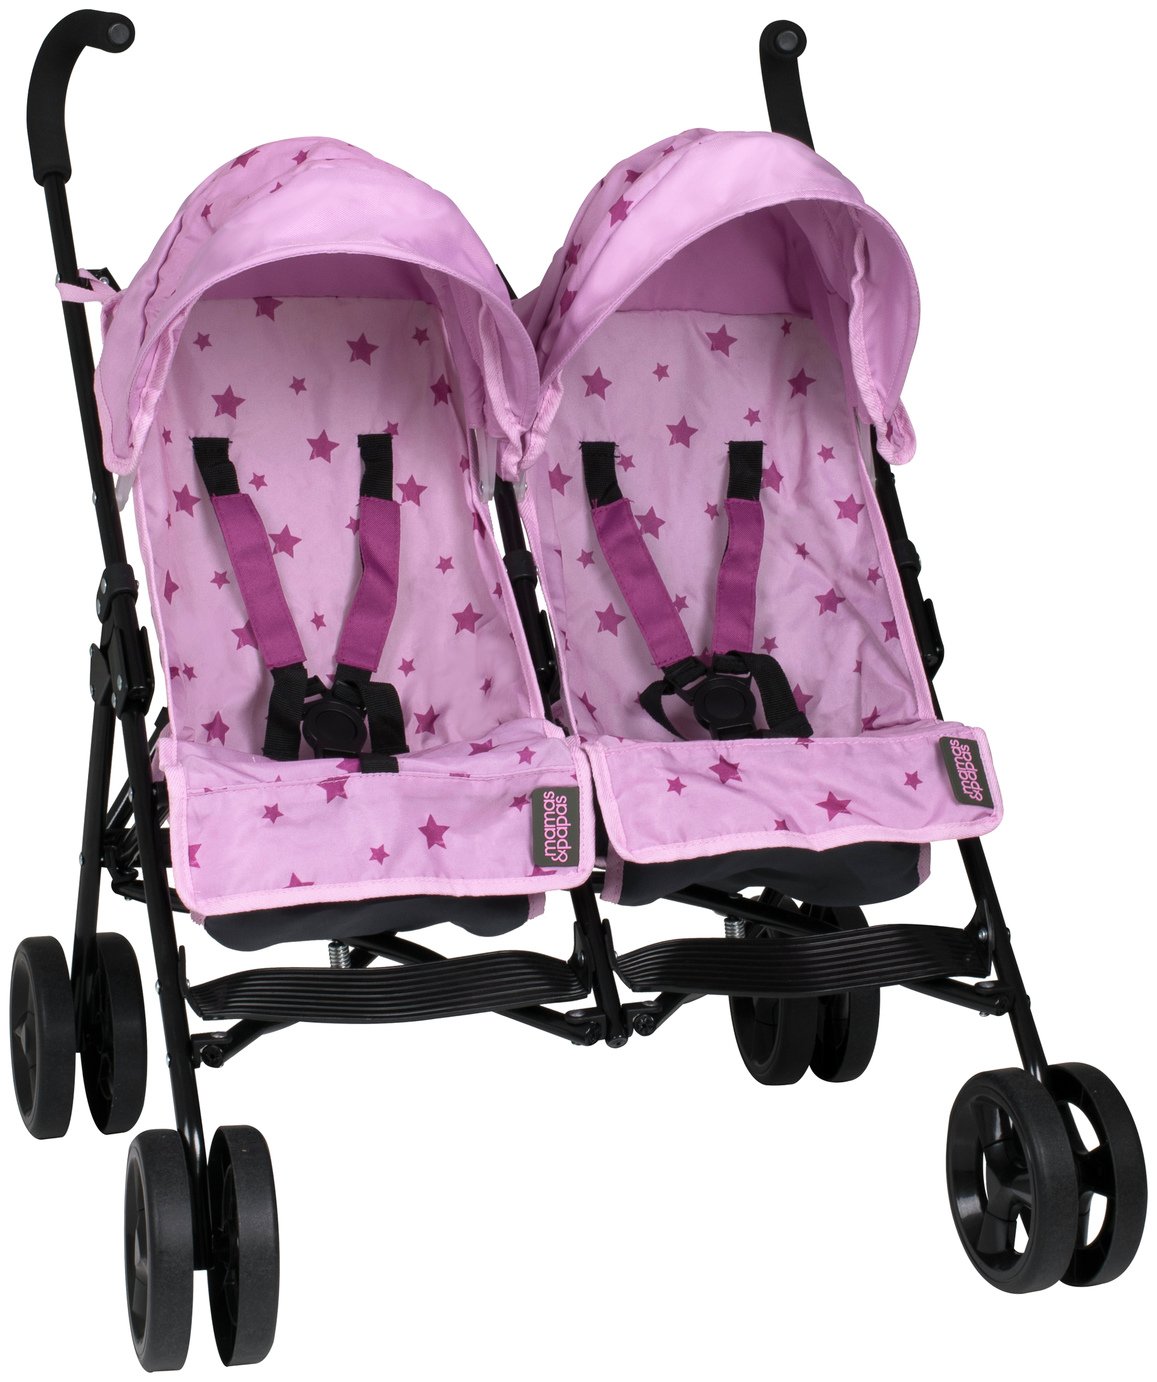 dolls prams for 10 year olds